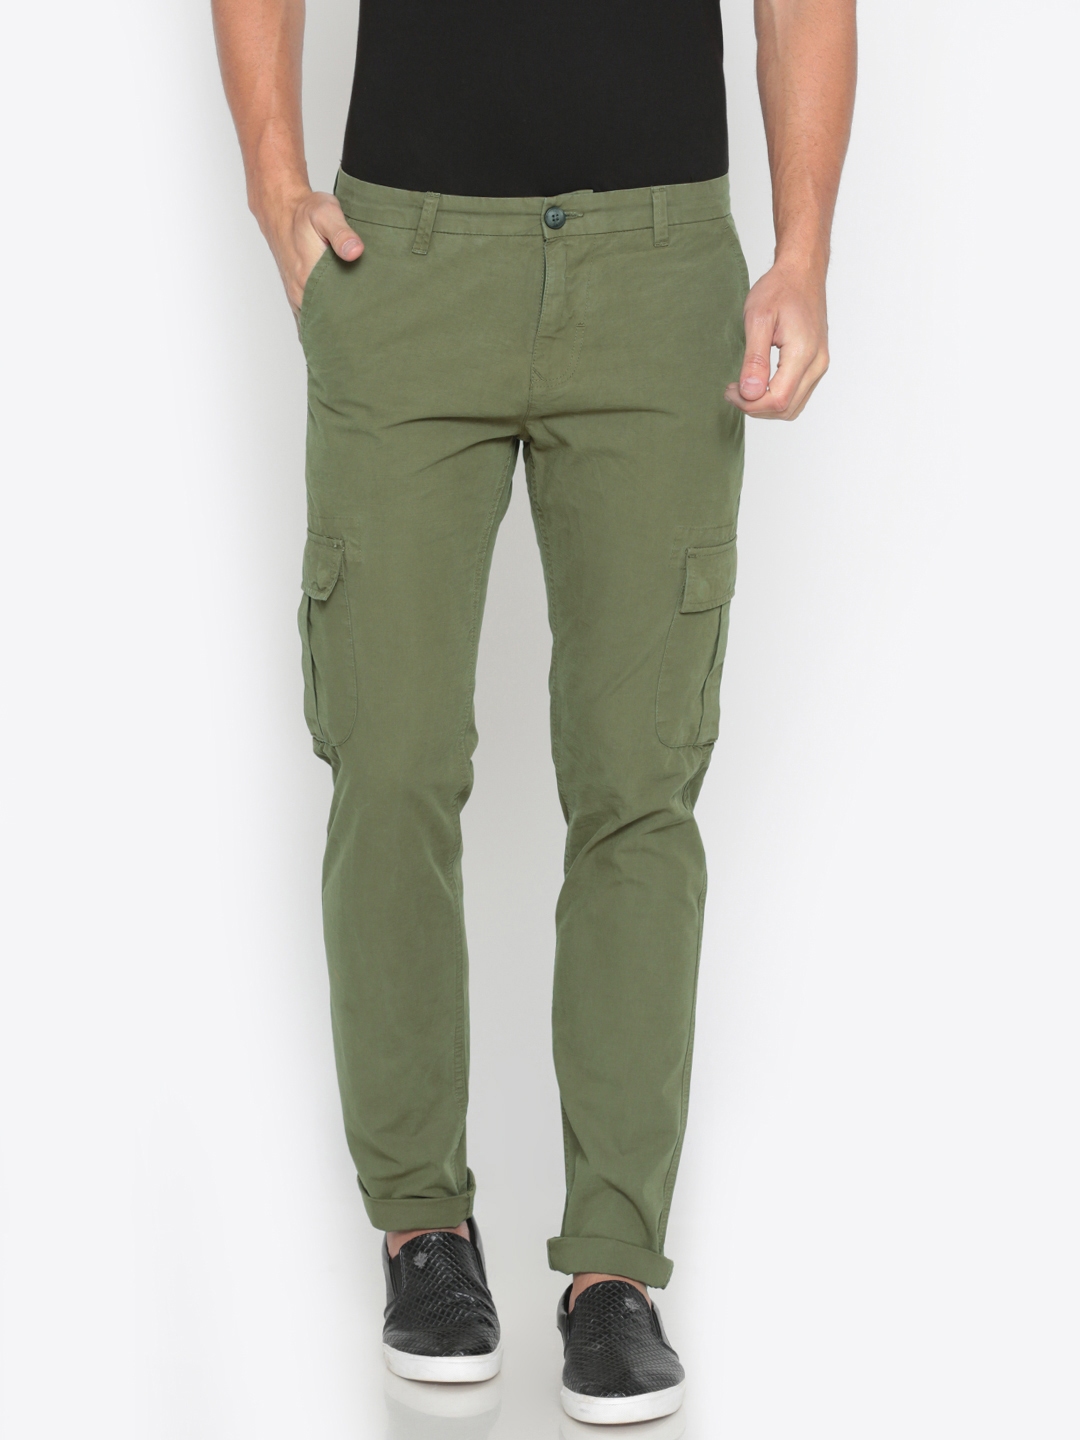 olive green colour jeans